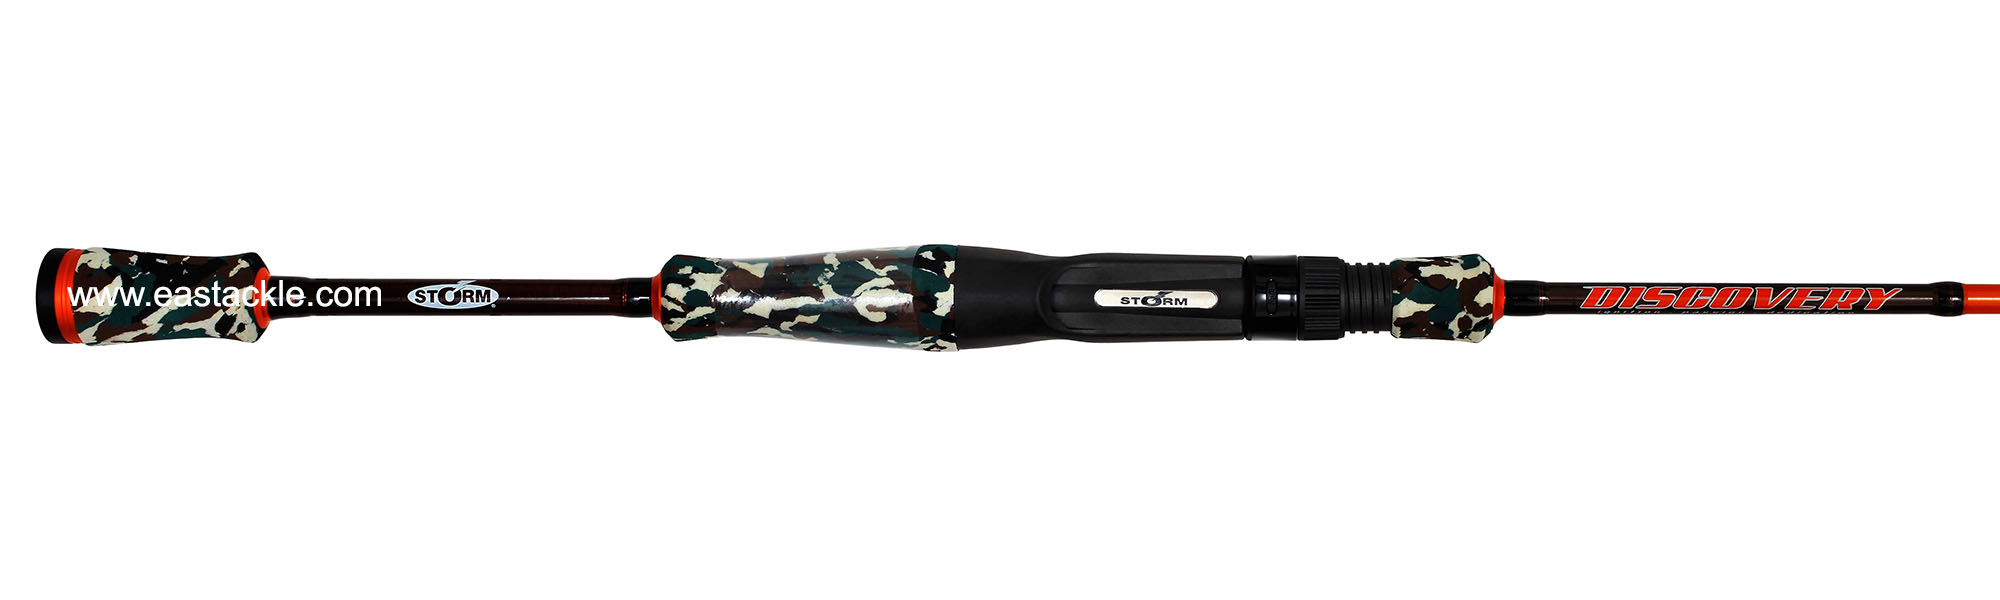 Storm - Discovery - DVC602L - Bait Casting Rod - Butt to Stripper Guide (Top View) | Eastackle